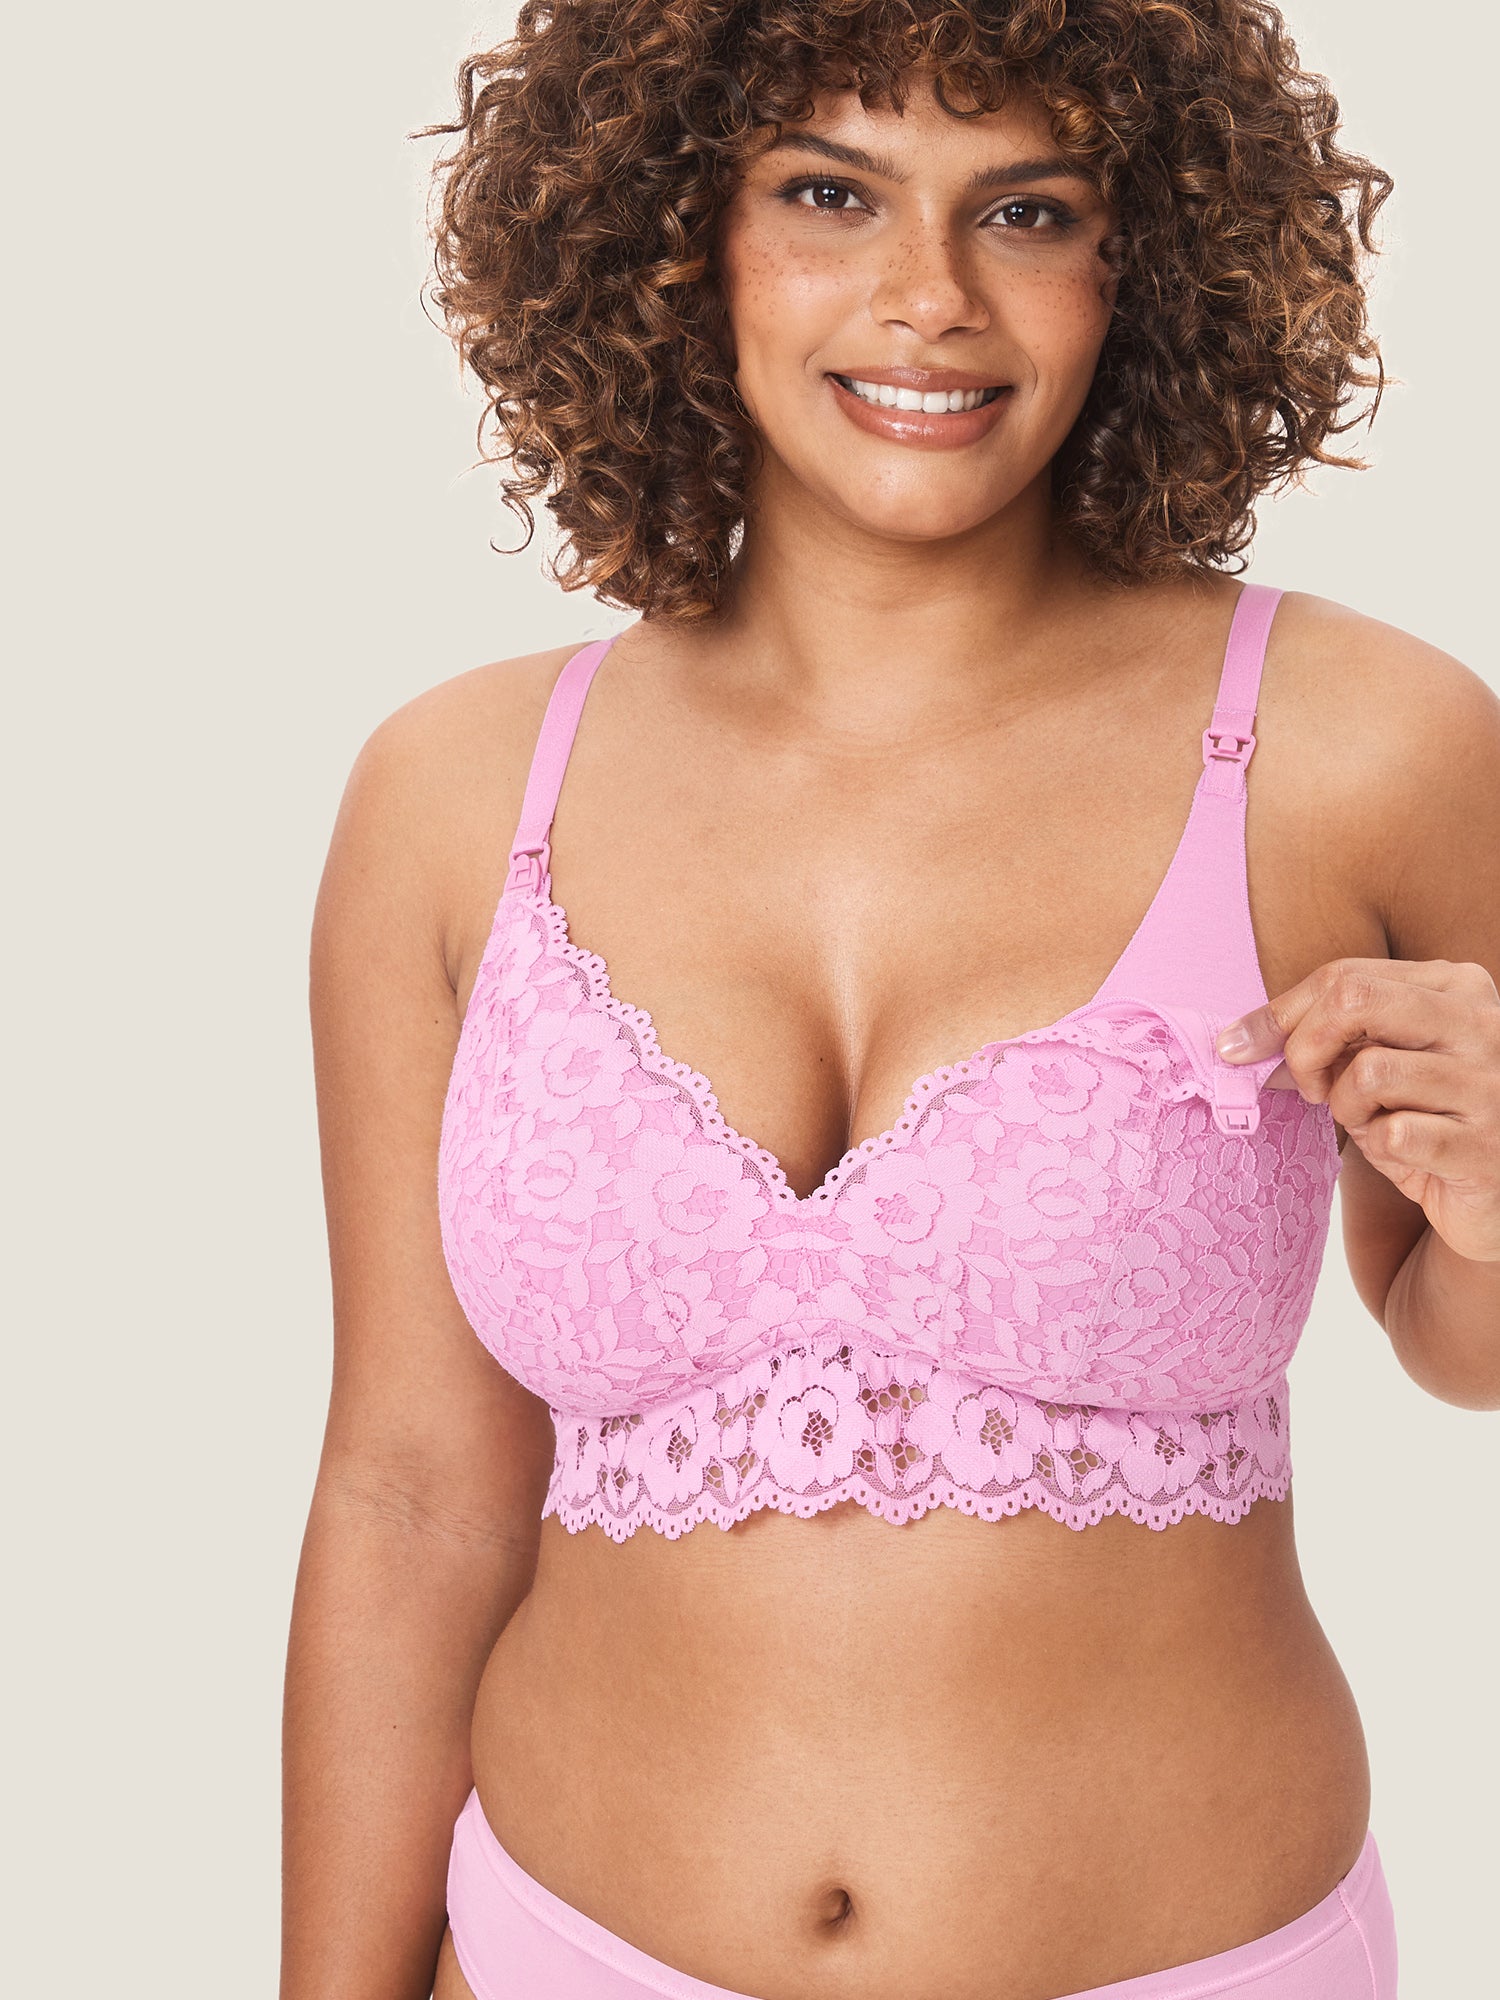 More Support Lace Nursing Bralette Candy Pink